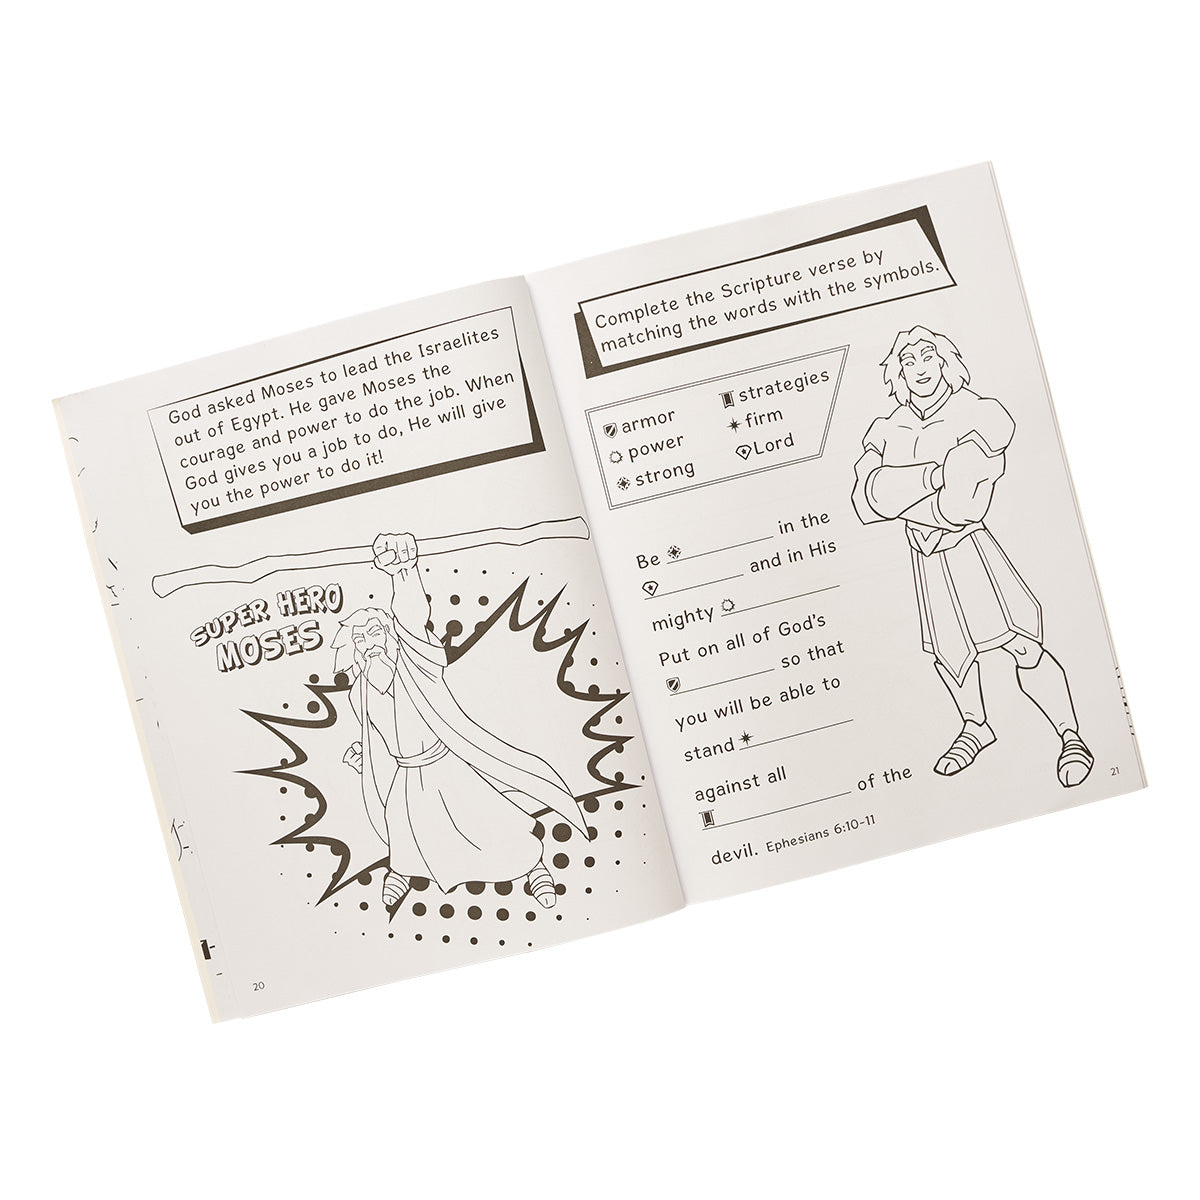 Image of Super Hero's Activity Book other